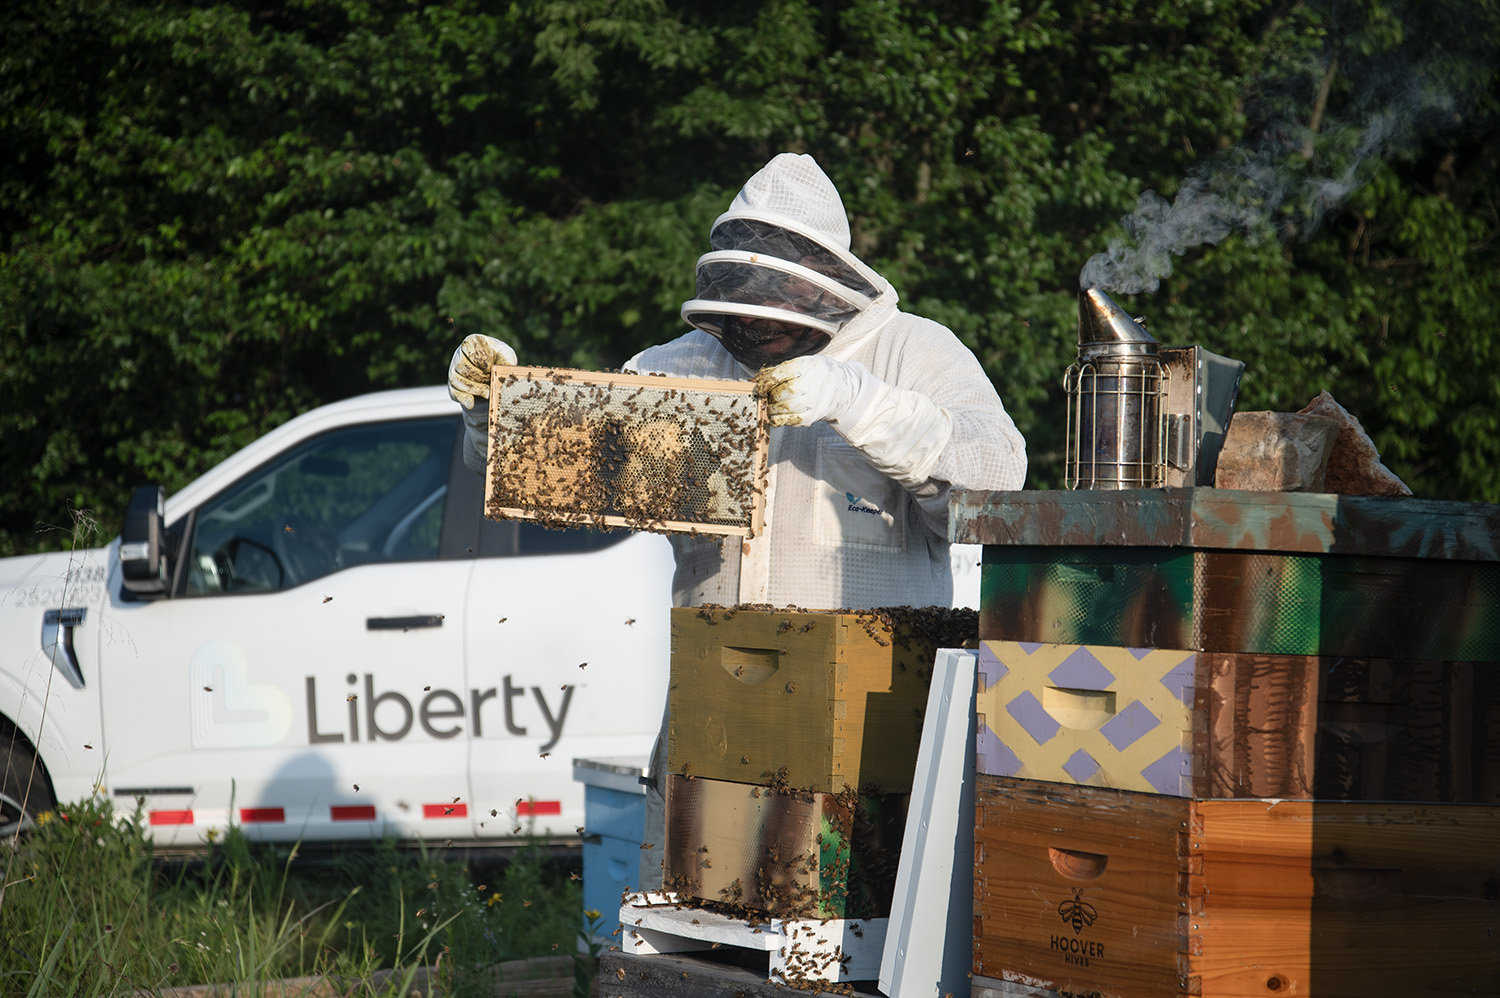 Let's talk about the birds and the bees: Learn how Liberty works to protect wildlife, habitats, and our planet